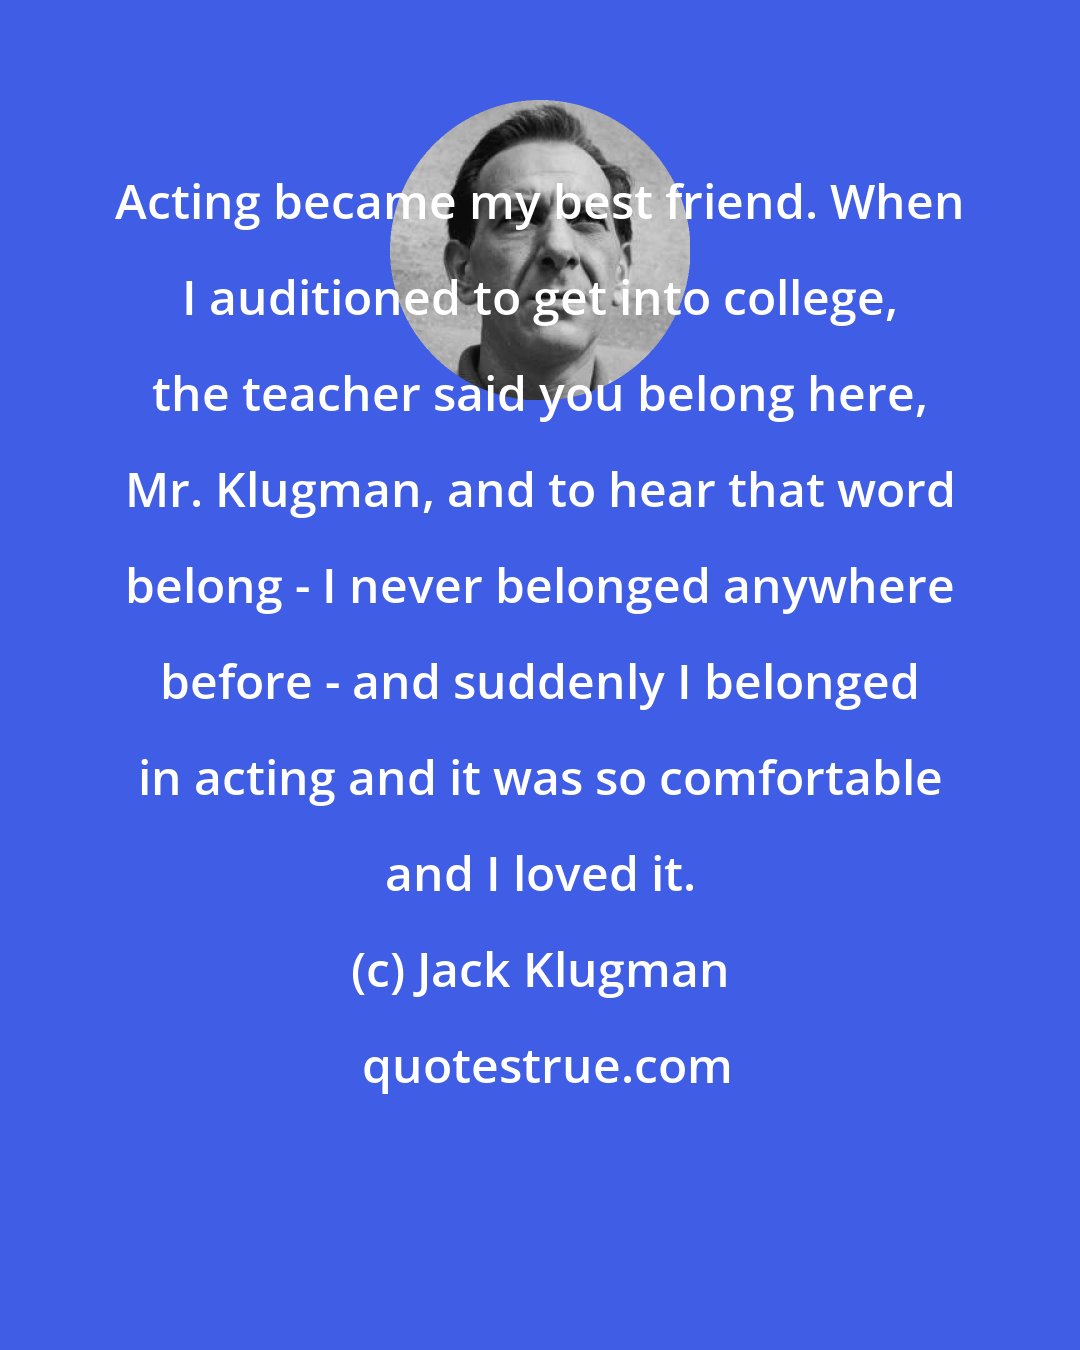 Jack Klugman: Acting became my best friend. When I auditioned to get into college, the teacher said you belong here, Mr. Klugman, and to hear that word belong - I never belonged anywhere before - and suddenly I belonged in acting and it was so comfortable and I loved it.